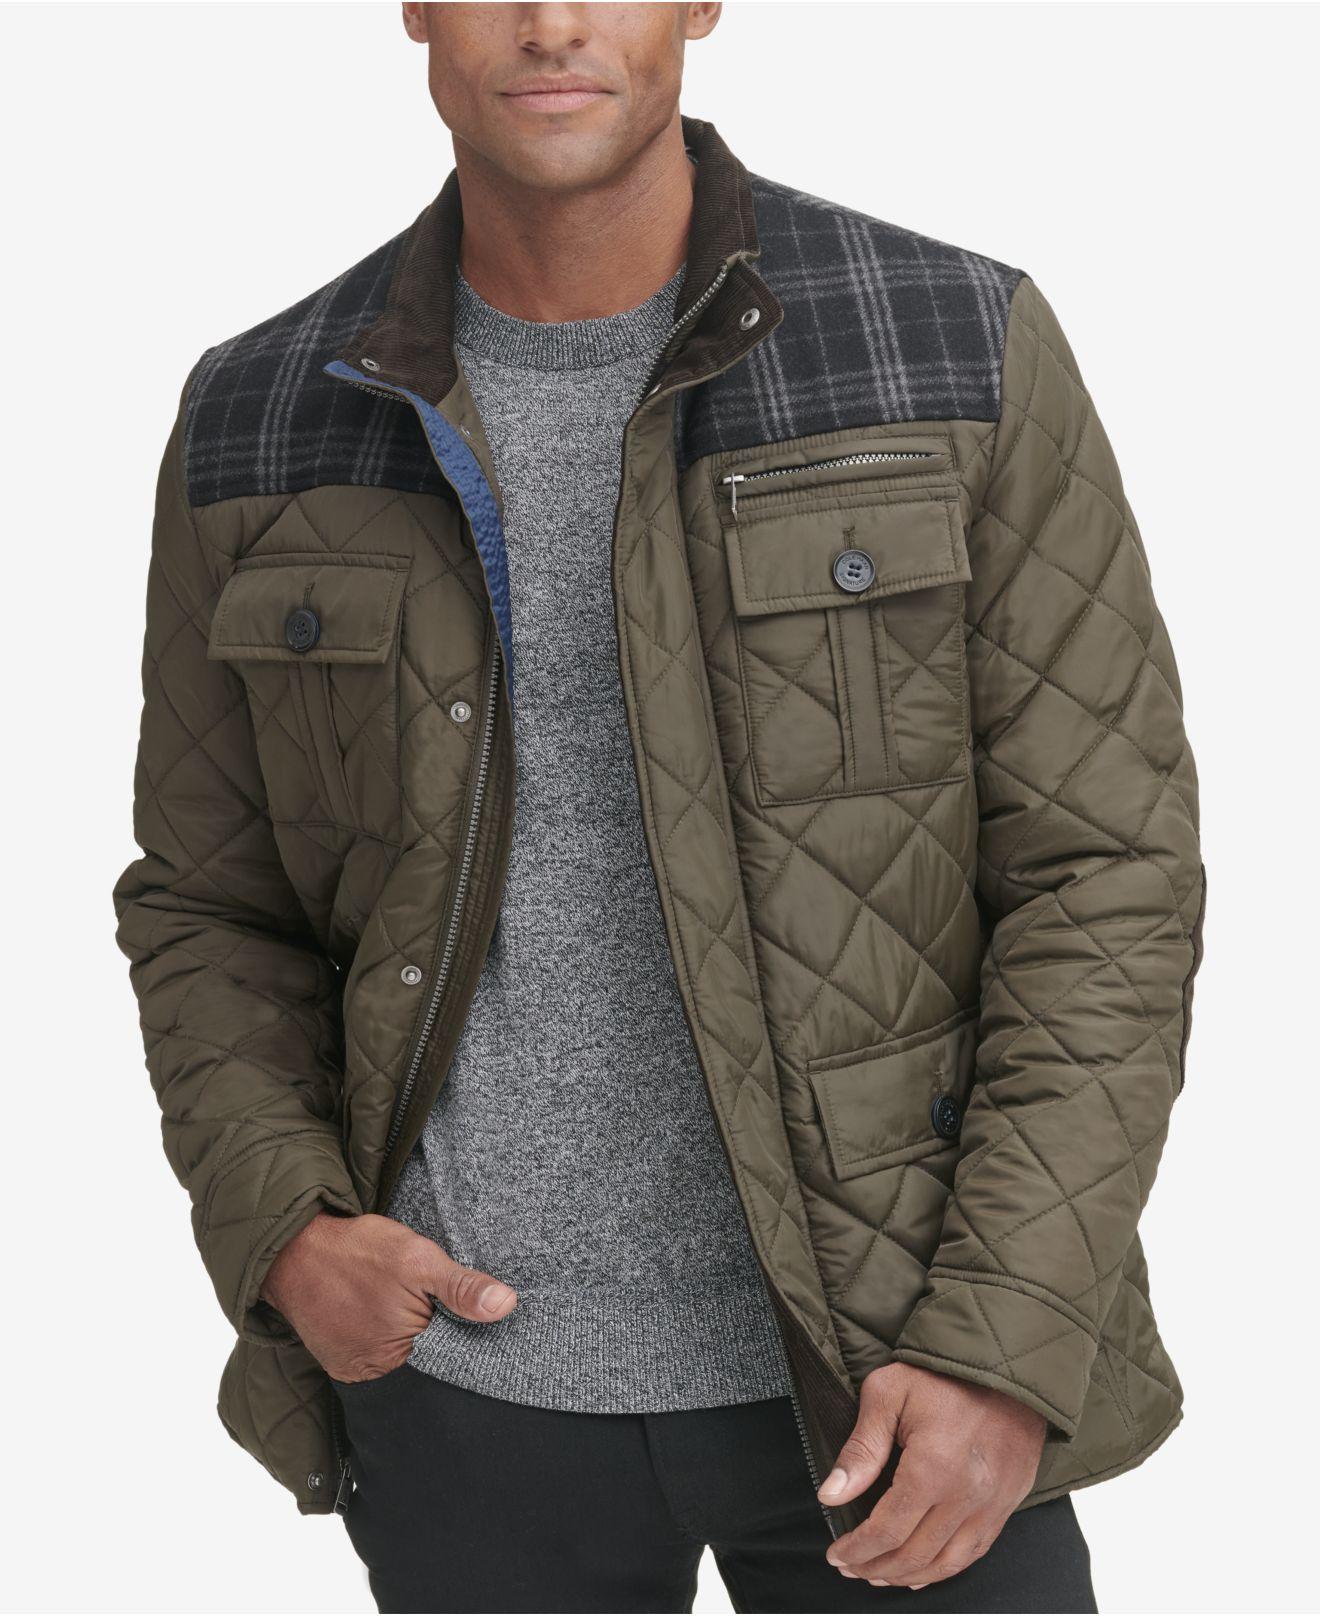 Cole Haan Synthetic Mixed Media Quilted Jacket in Green for Men - Lyst